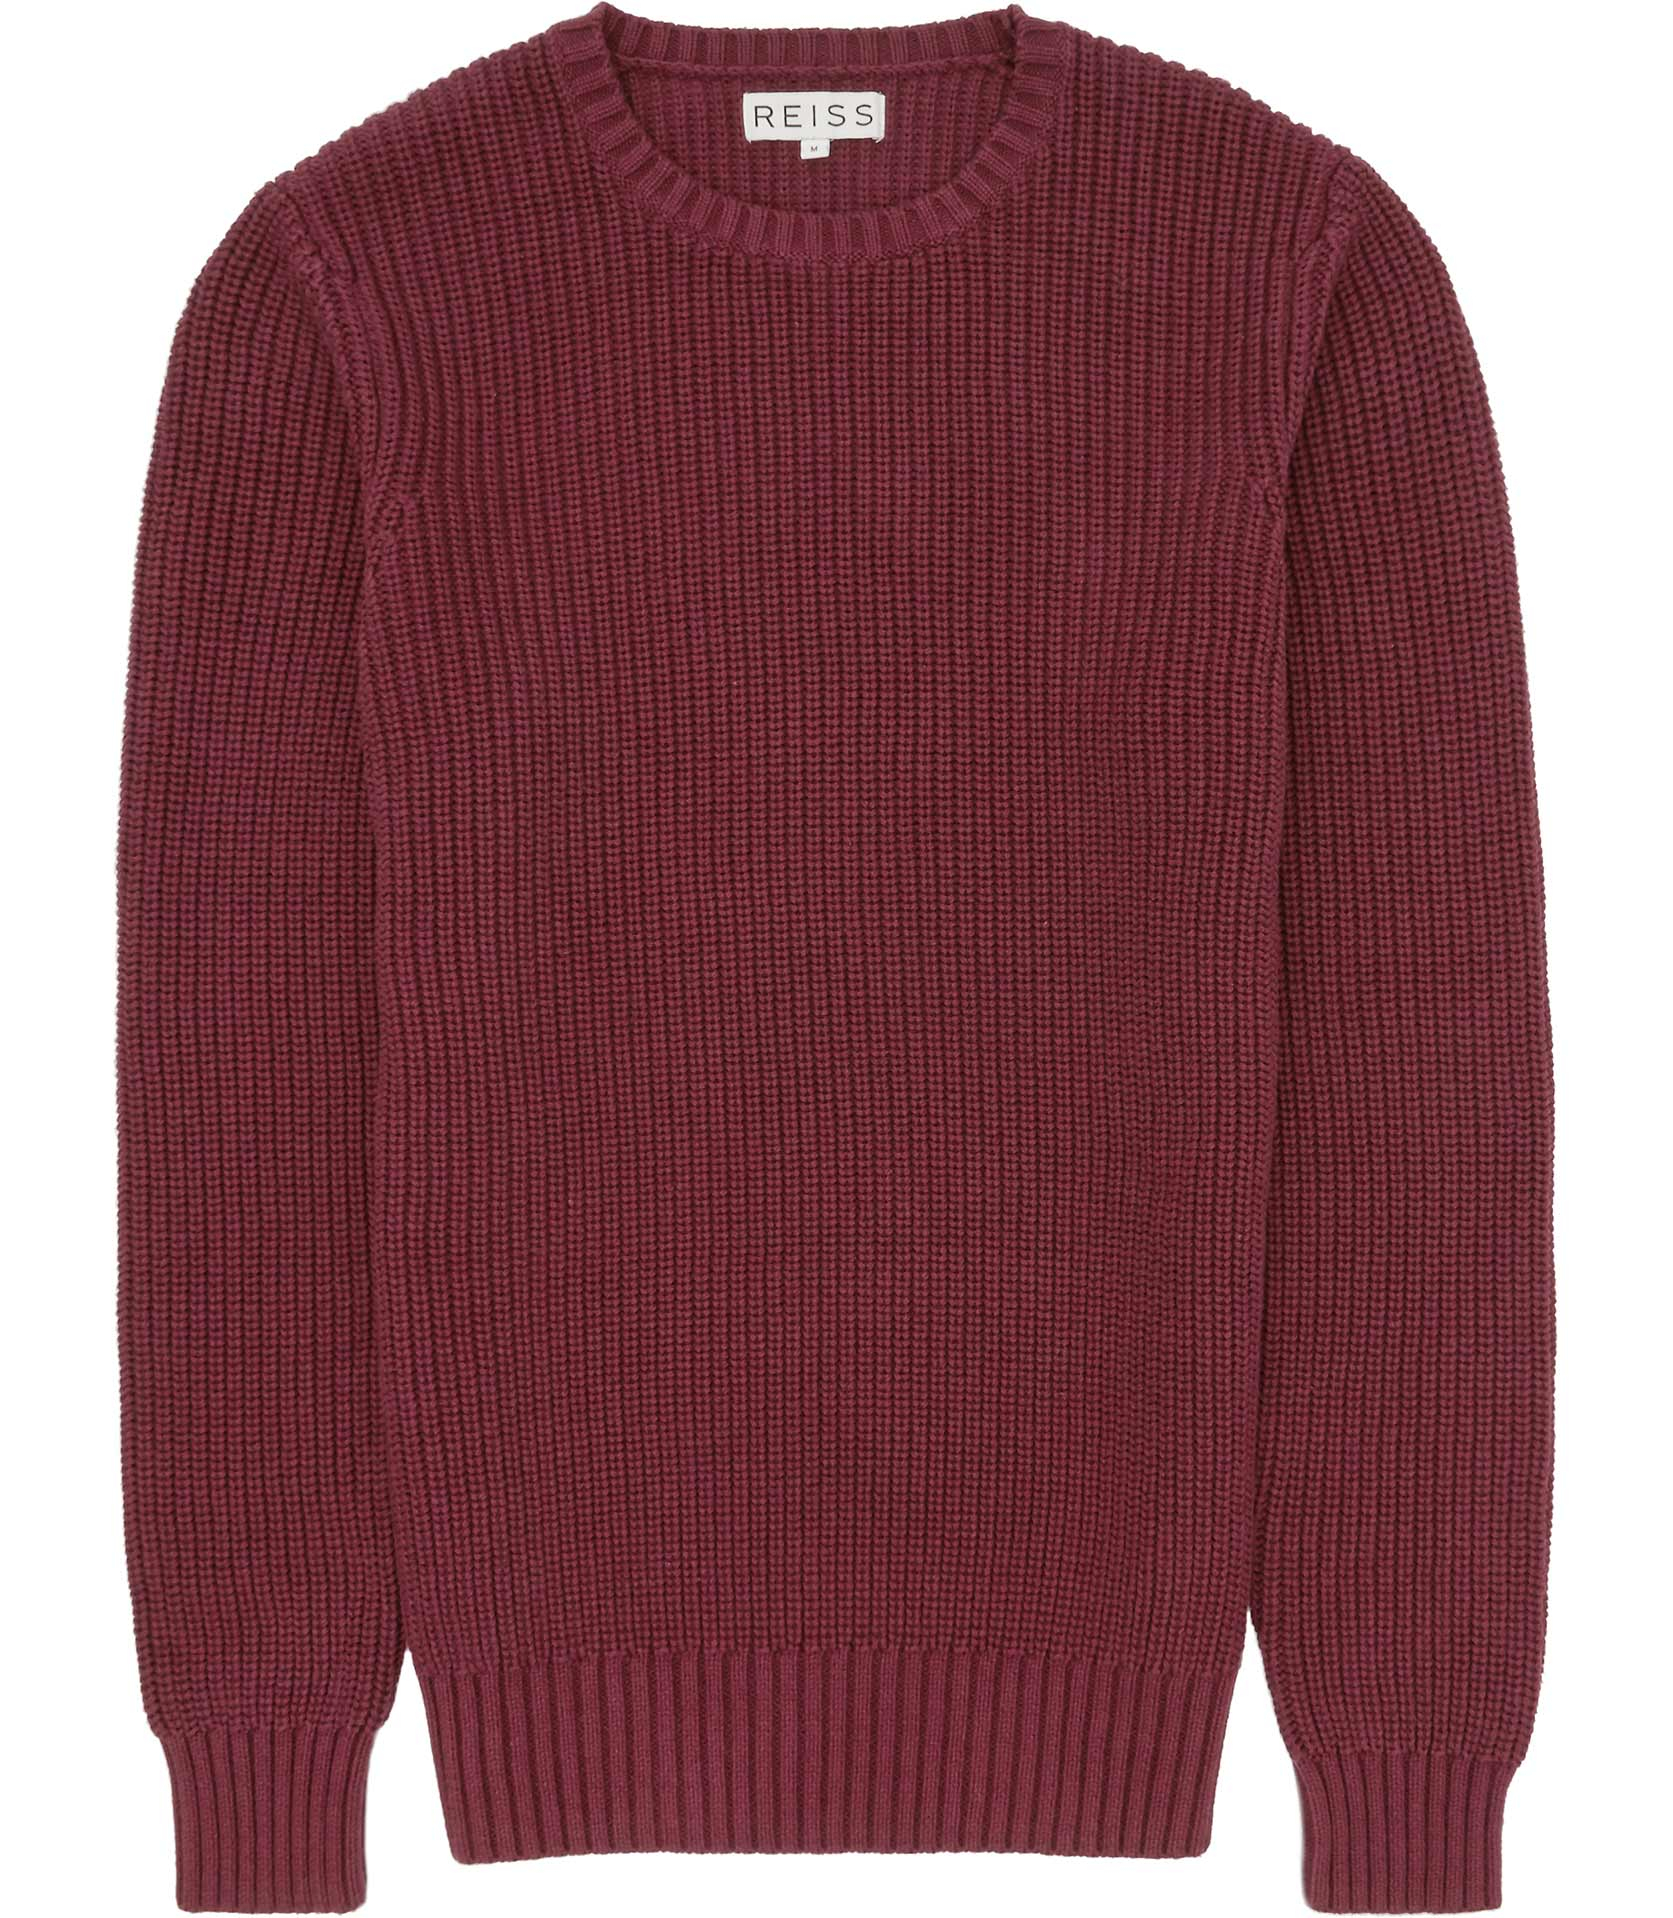 Lyst - Reiss Nerve Ribbed Knit Jumper in Red for Men